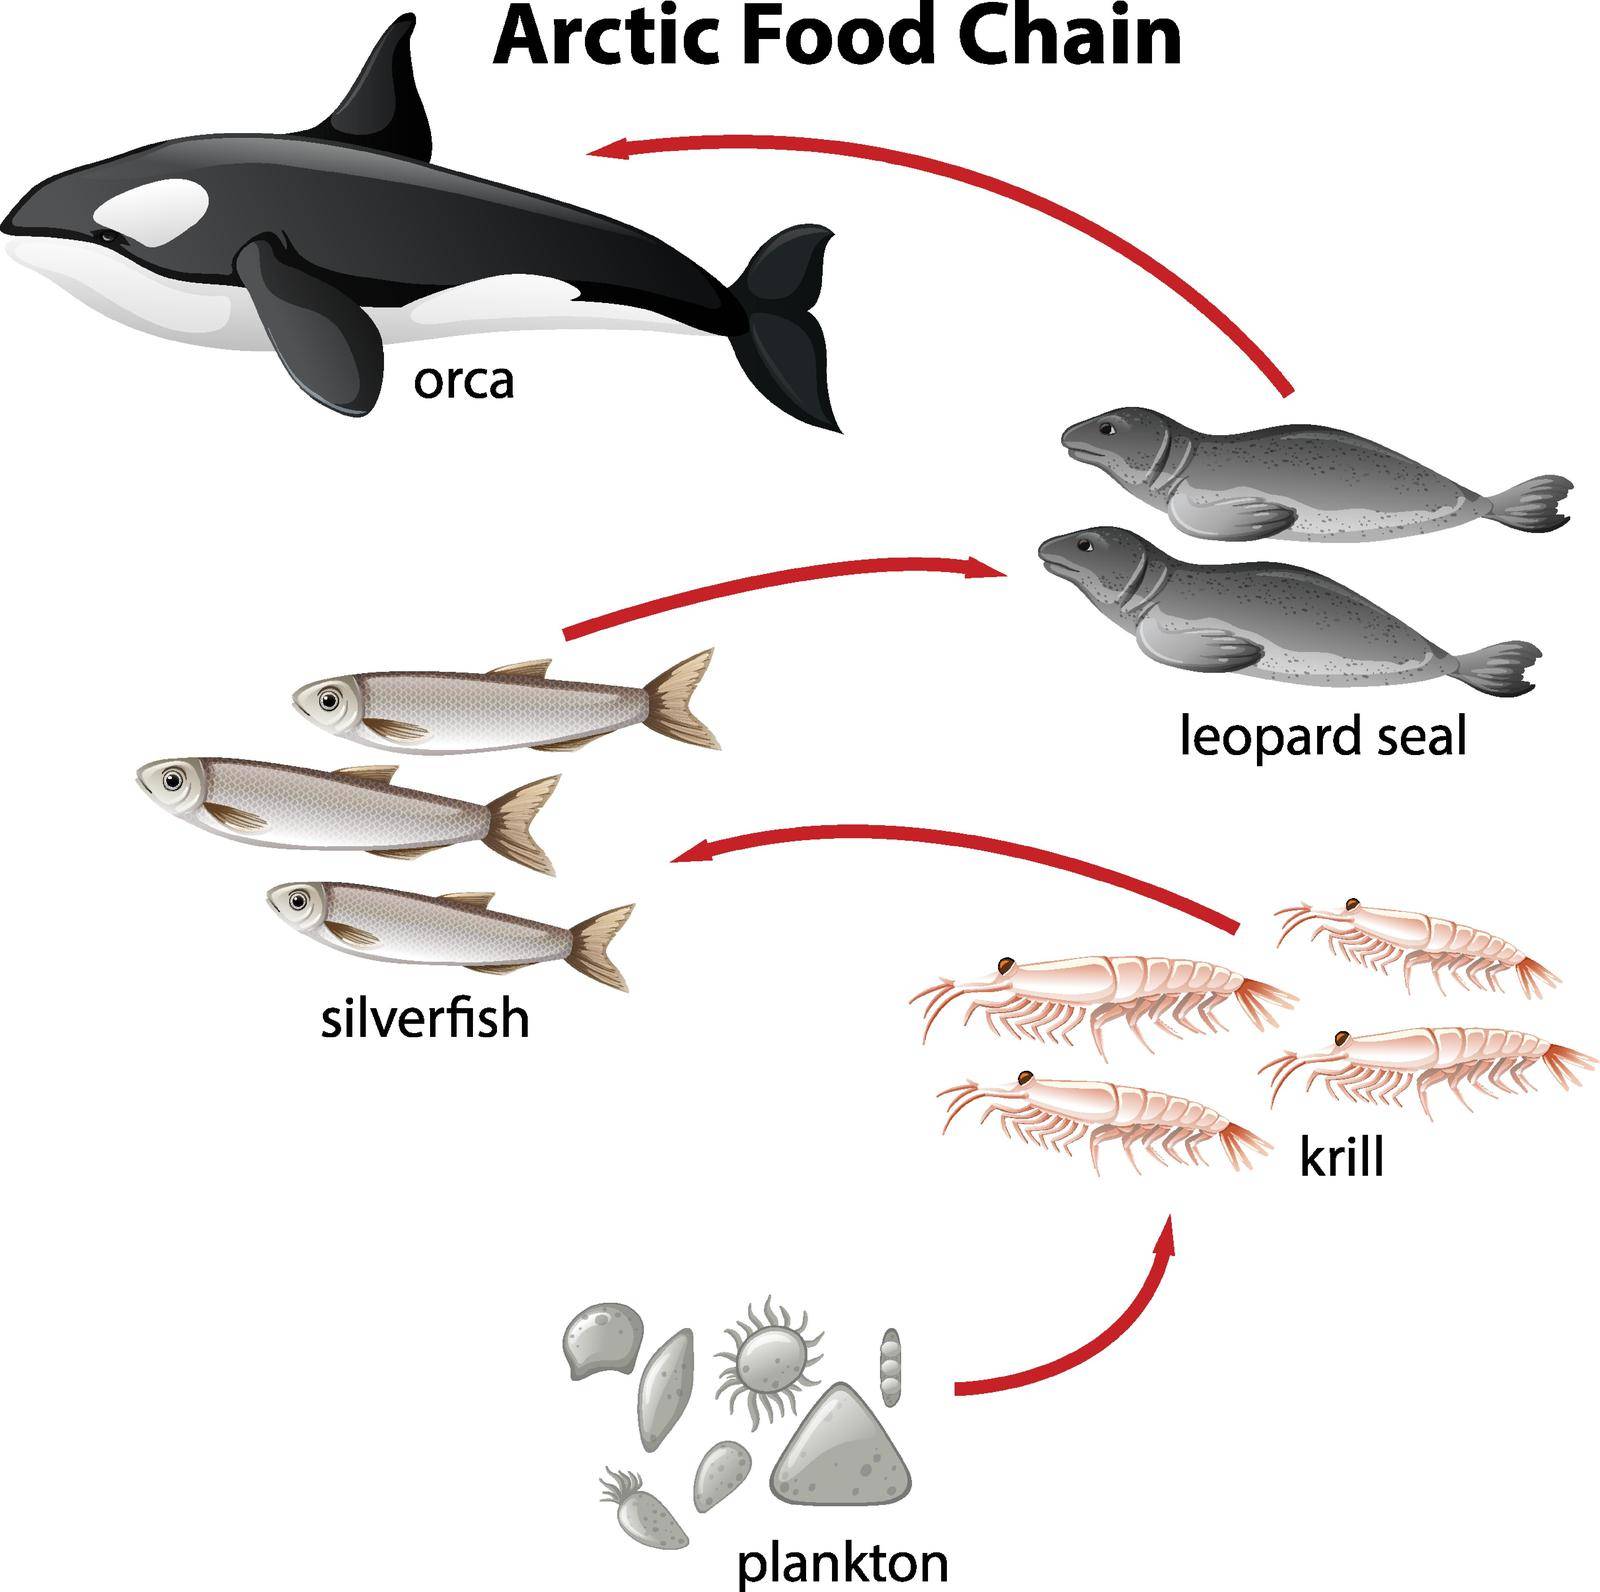 Diagram of arctic food chain from plantons to orca Stock Image |  VectorGrove - Royalty Free Vector Images with commercial license